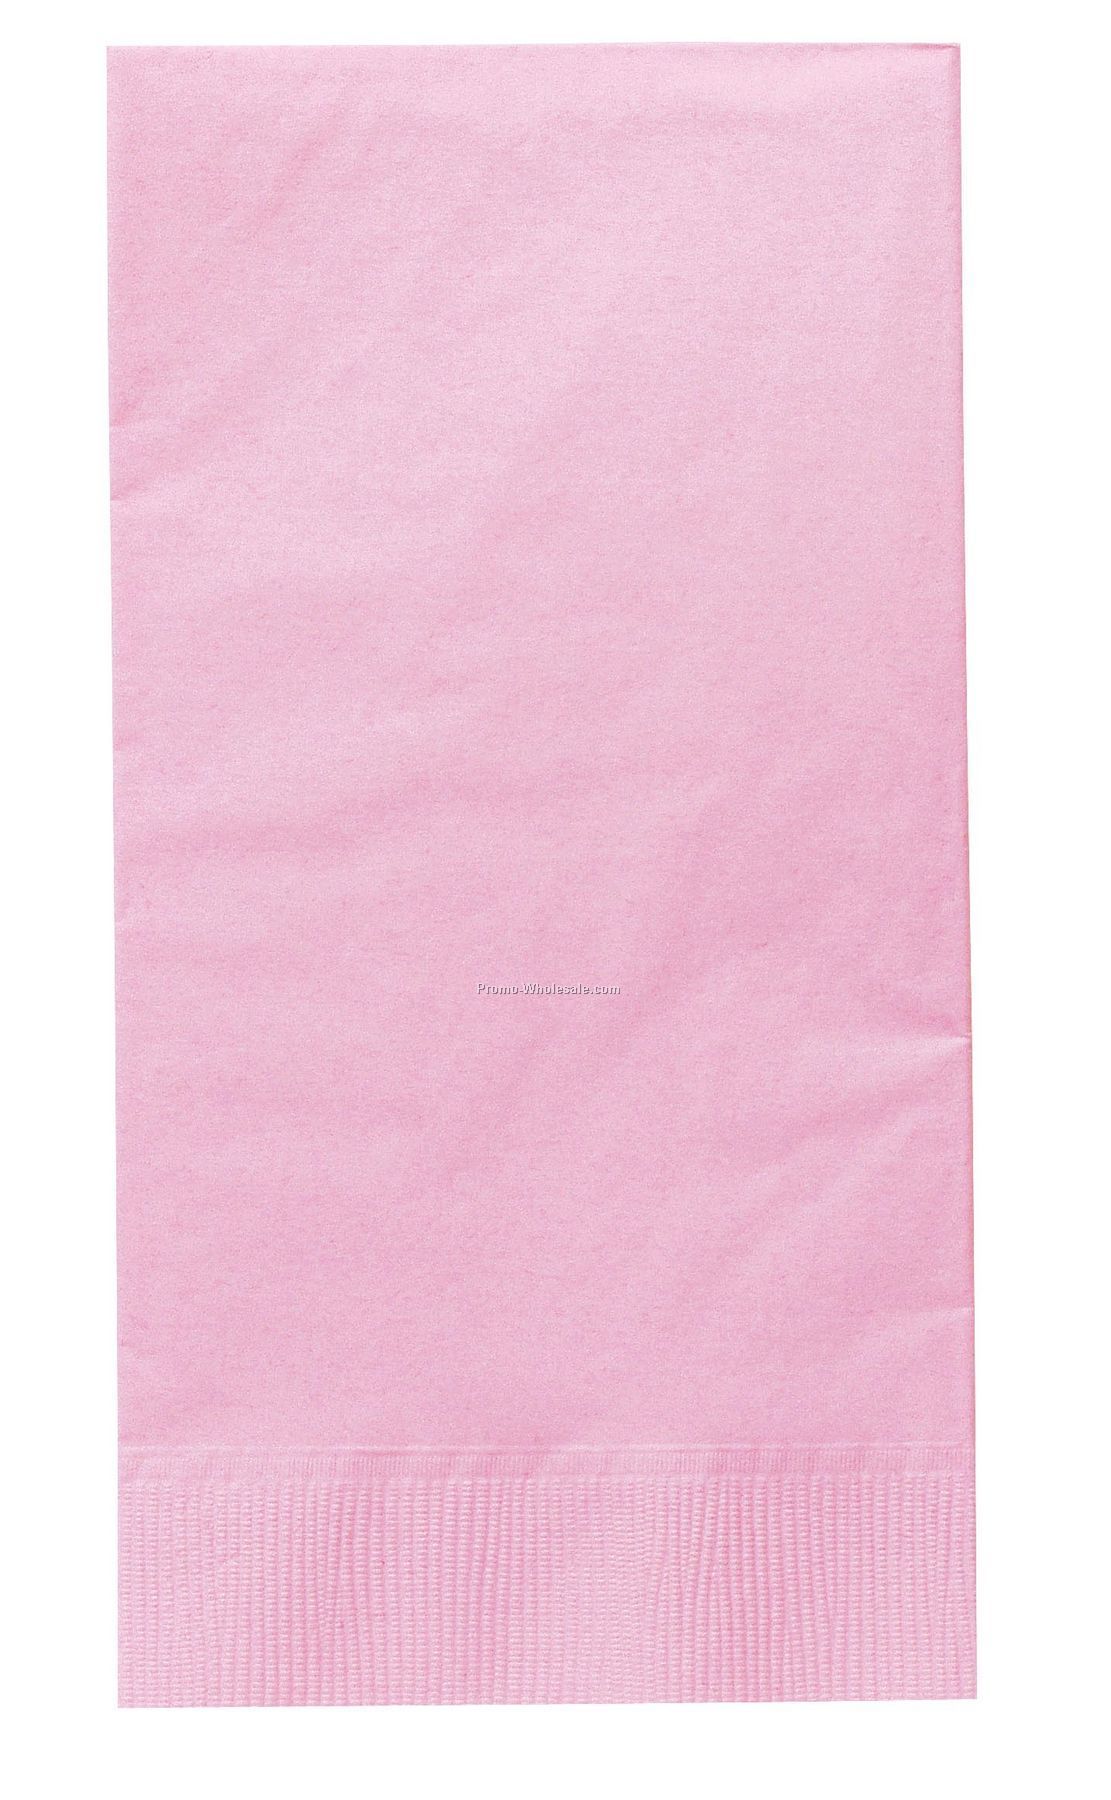 The 500 Line Colorware Classic Pink Dinner Napkins W/ 1/8 Fold